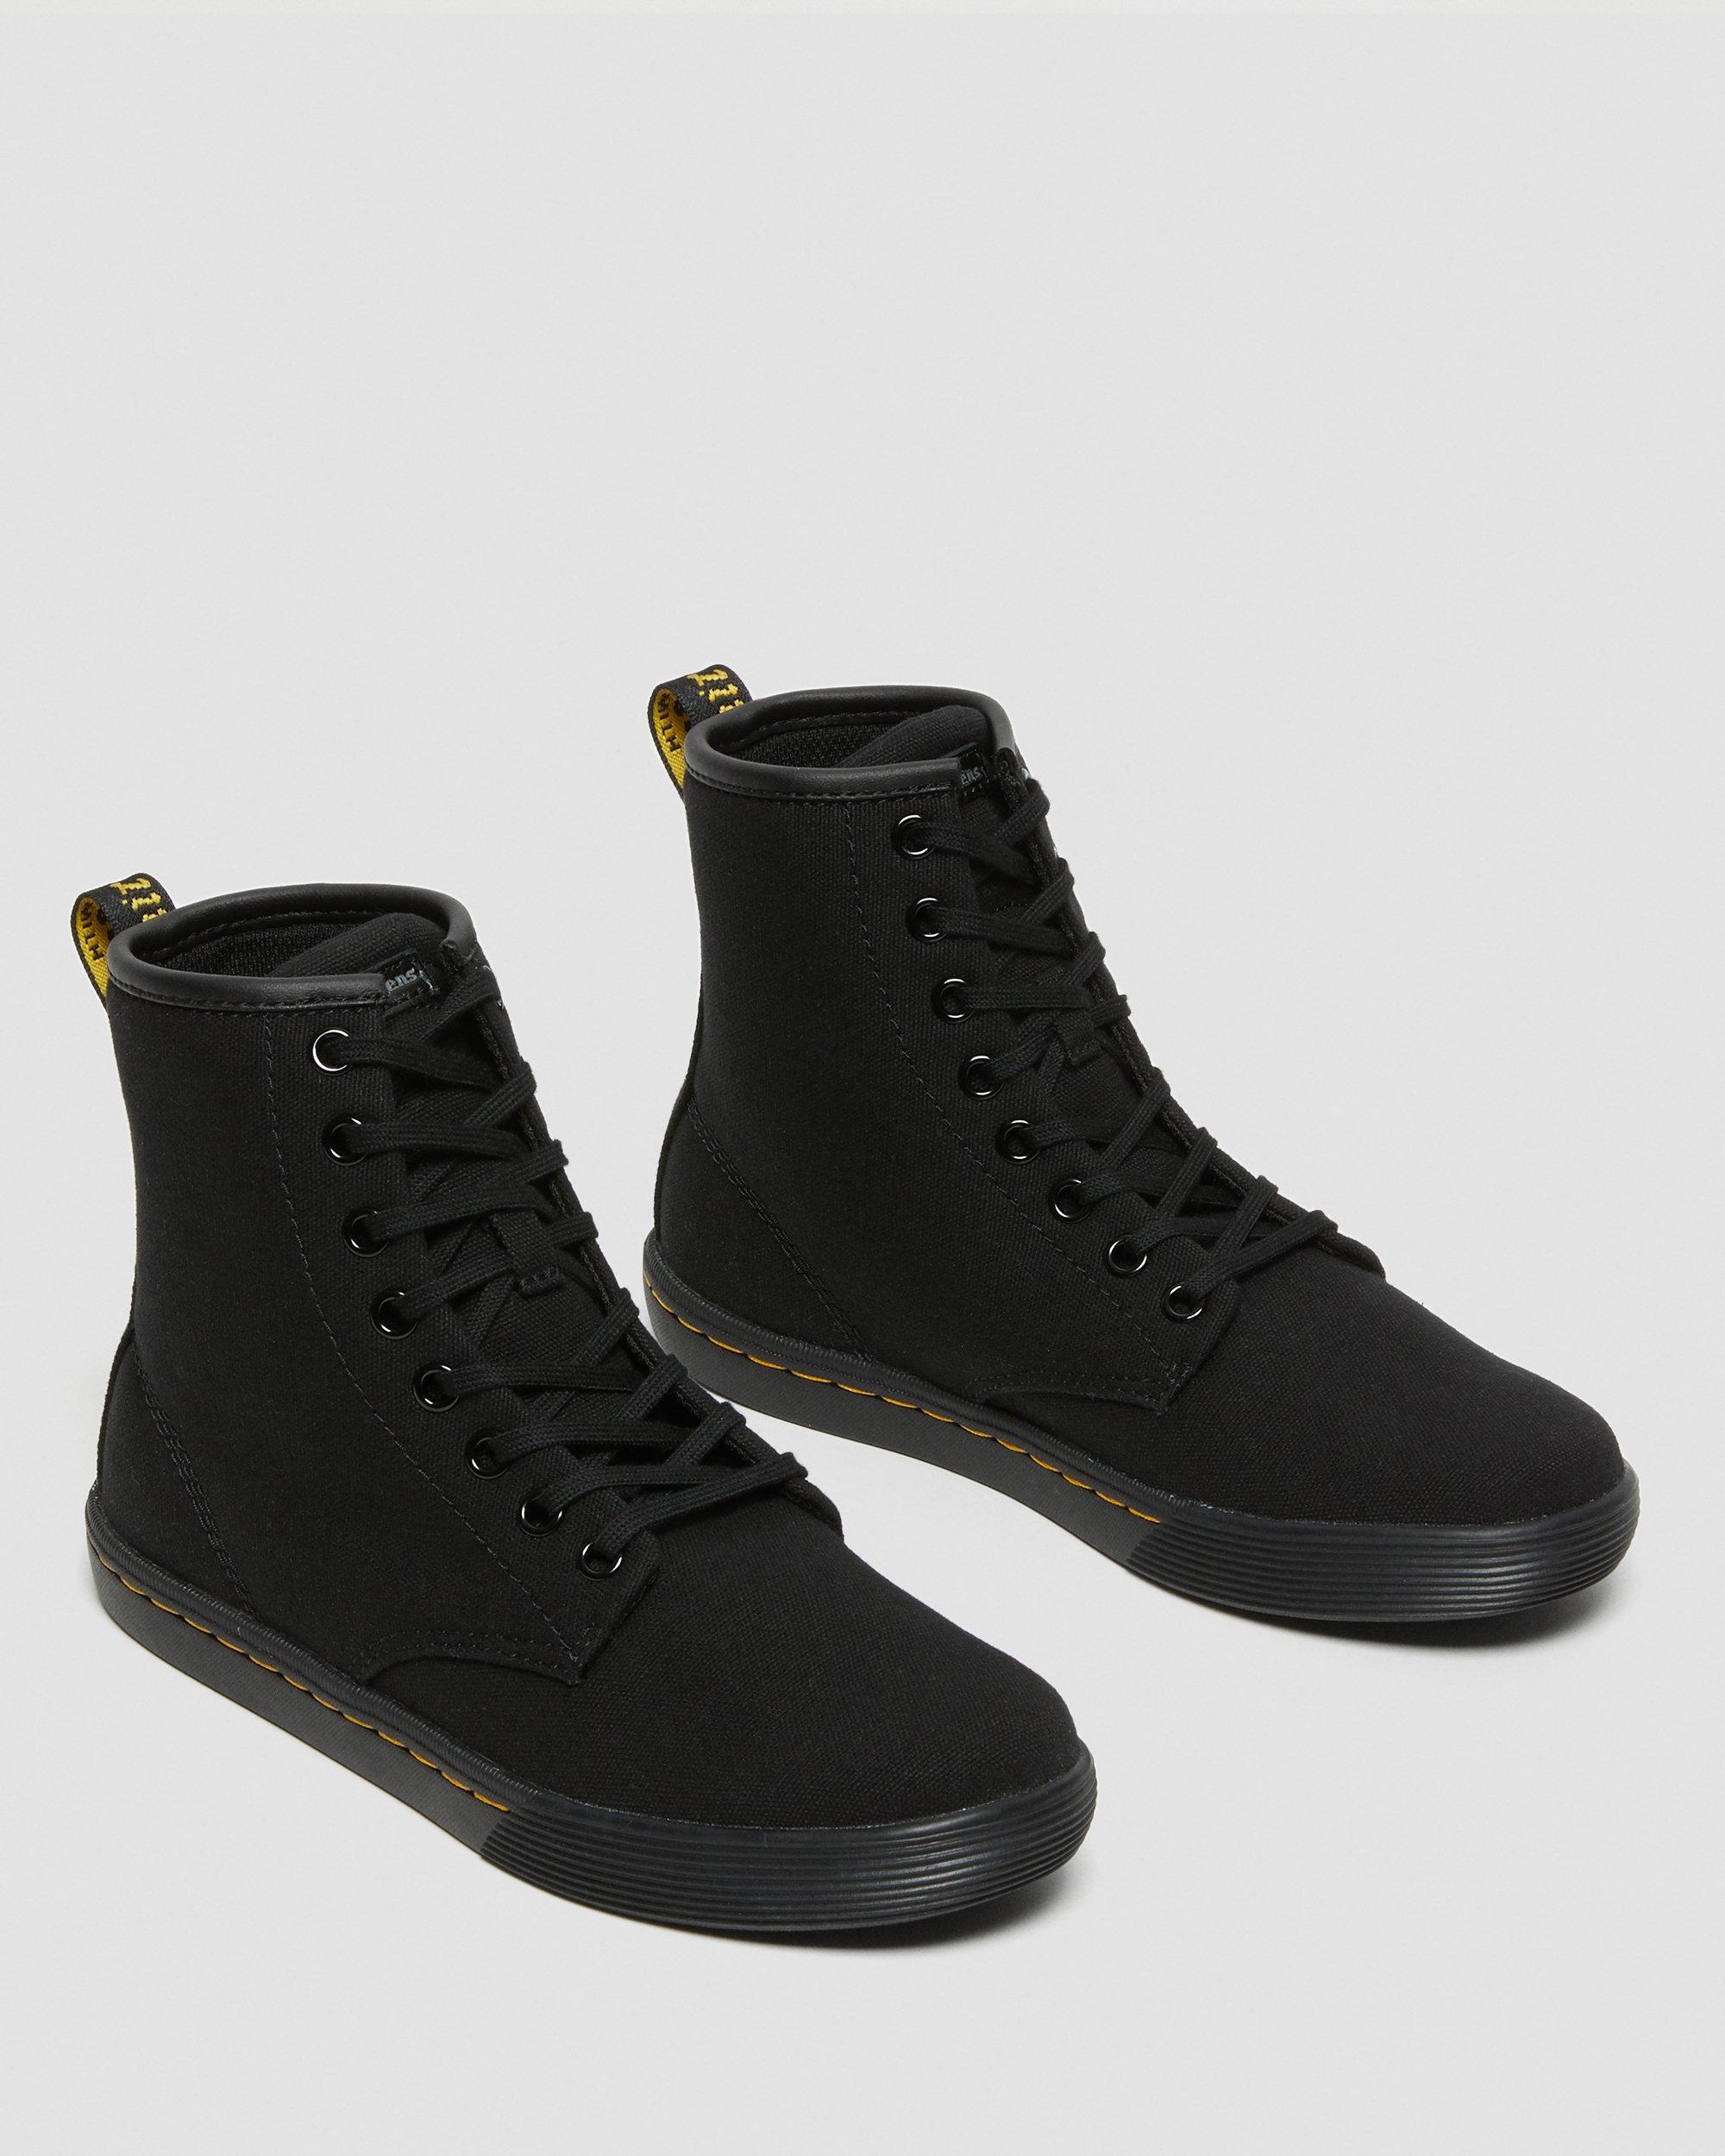 Sheridan Women's Canvas Casual Boots in Black | Dr. Martens